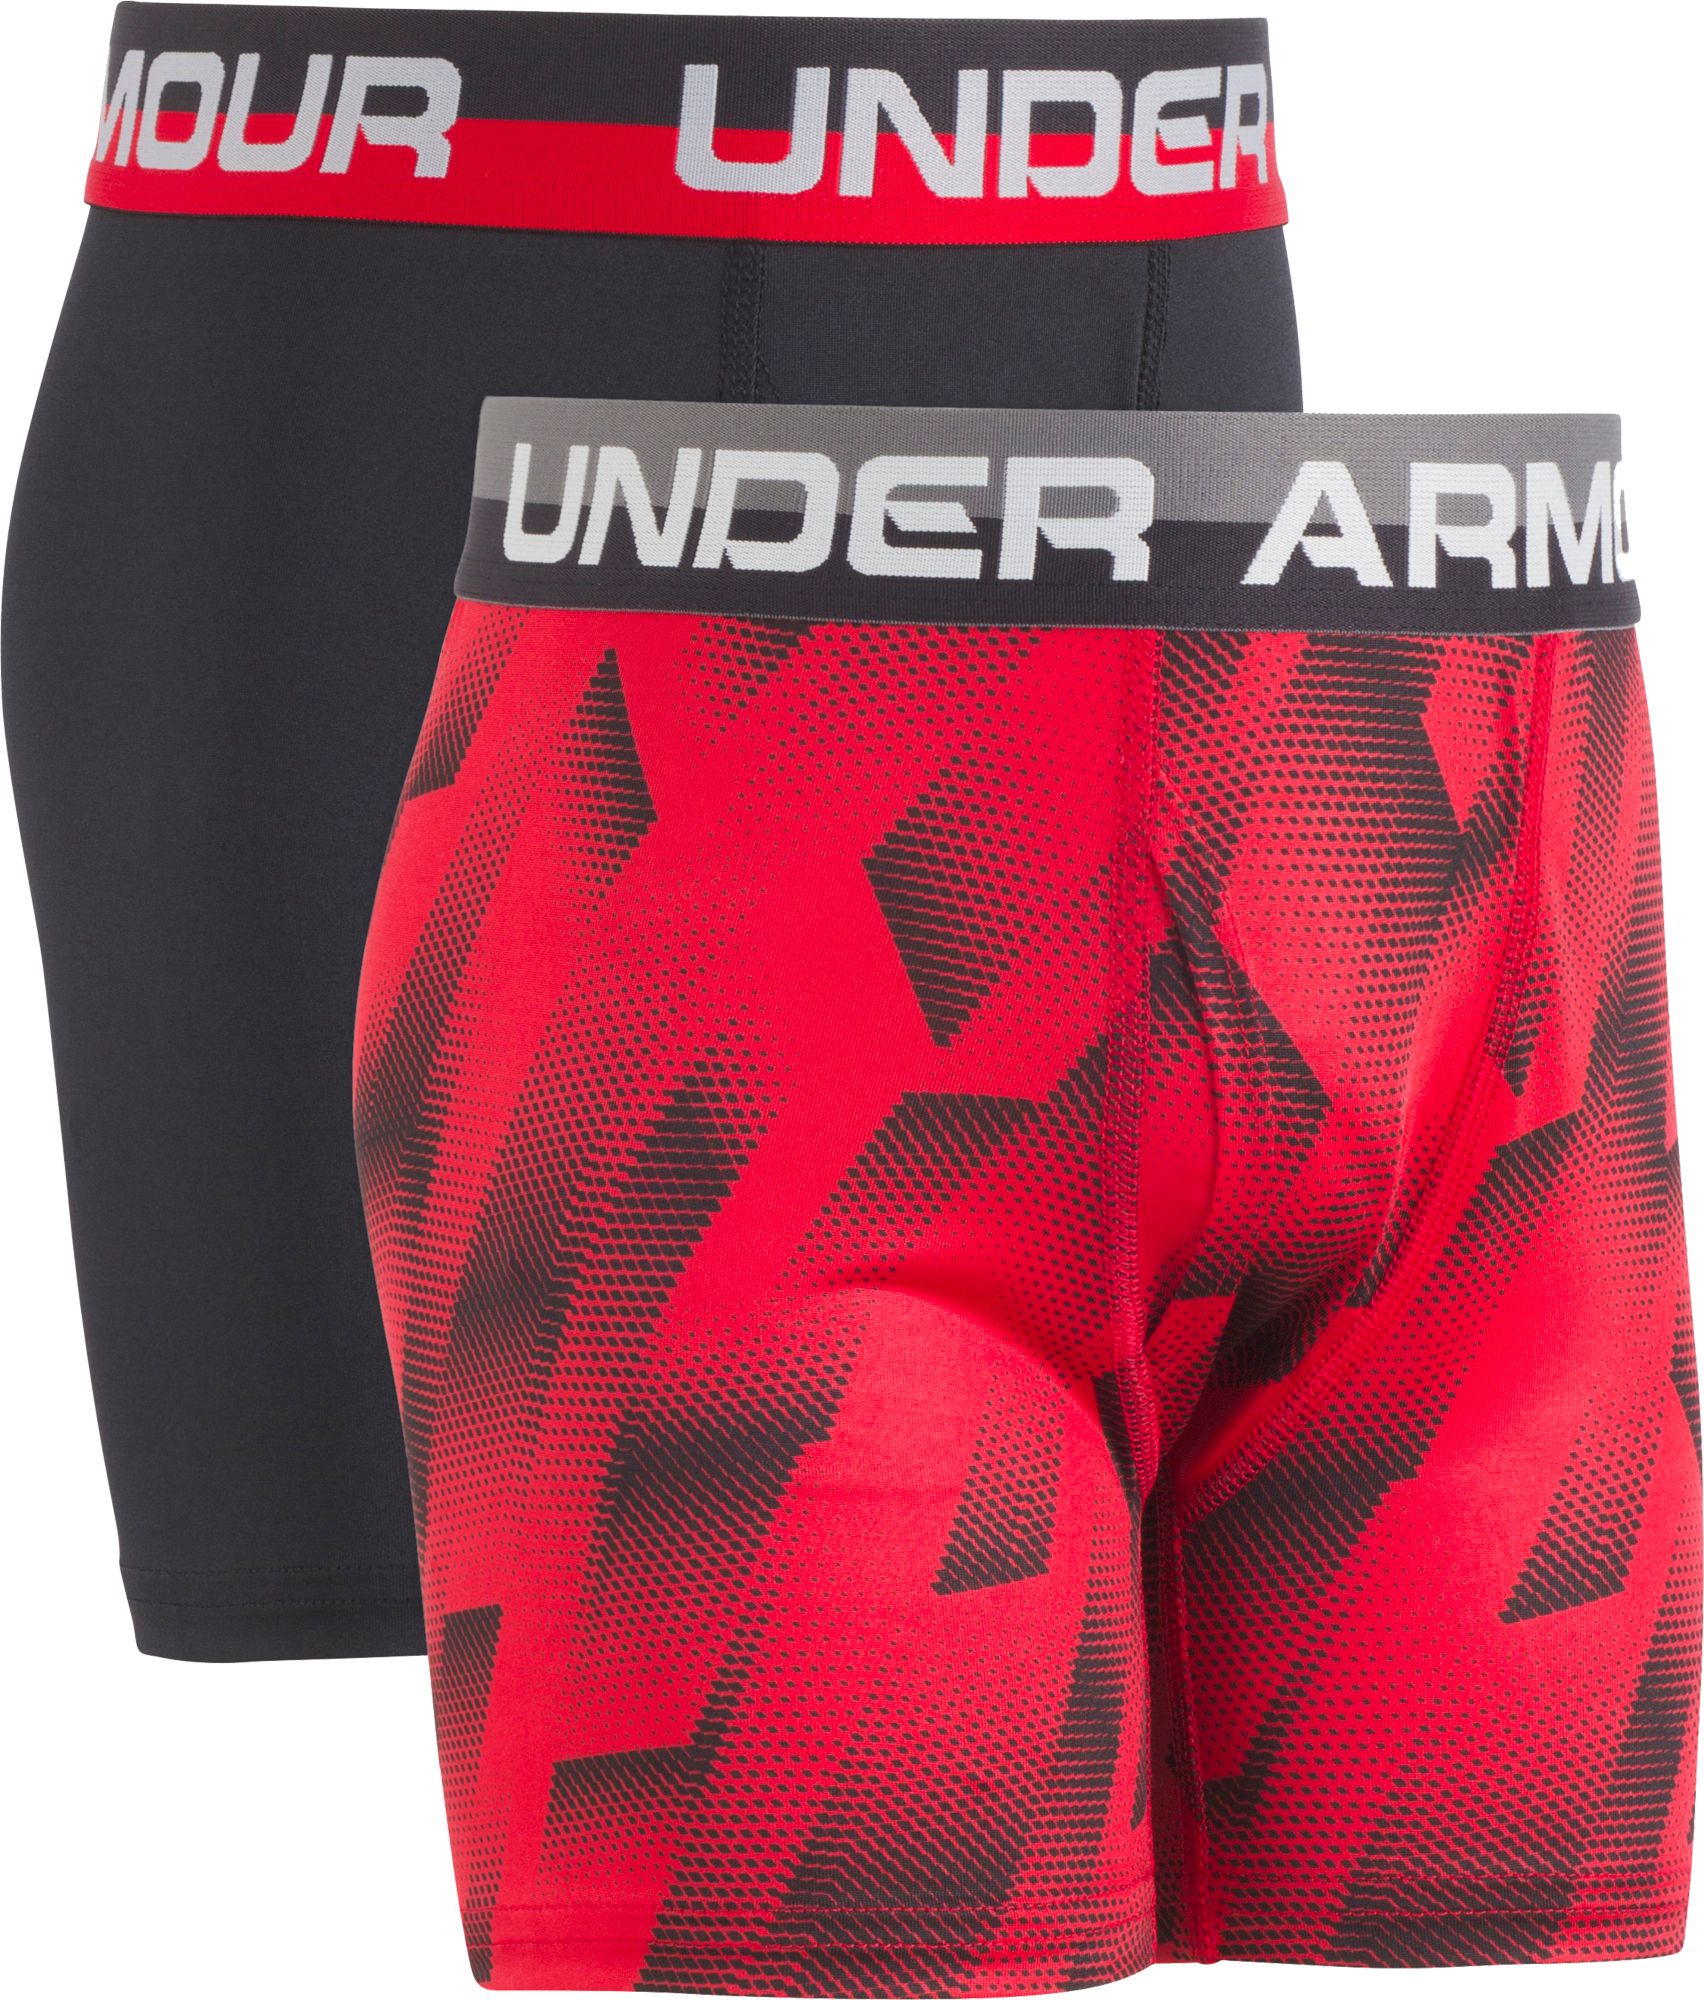 armour boxers